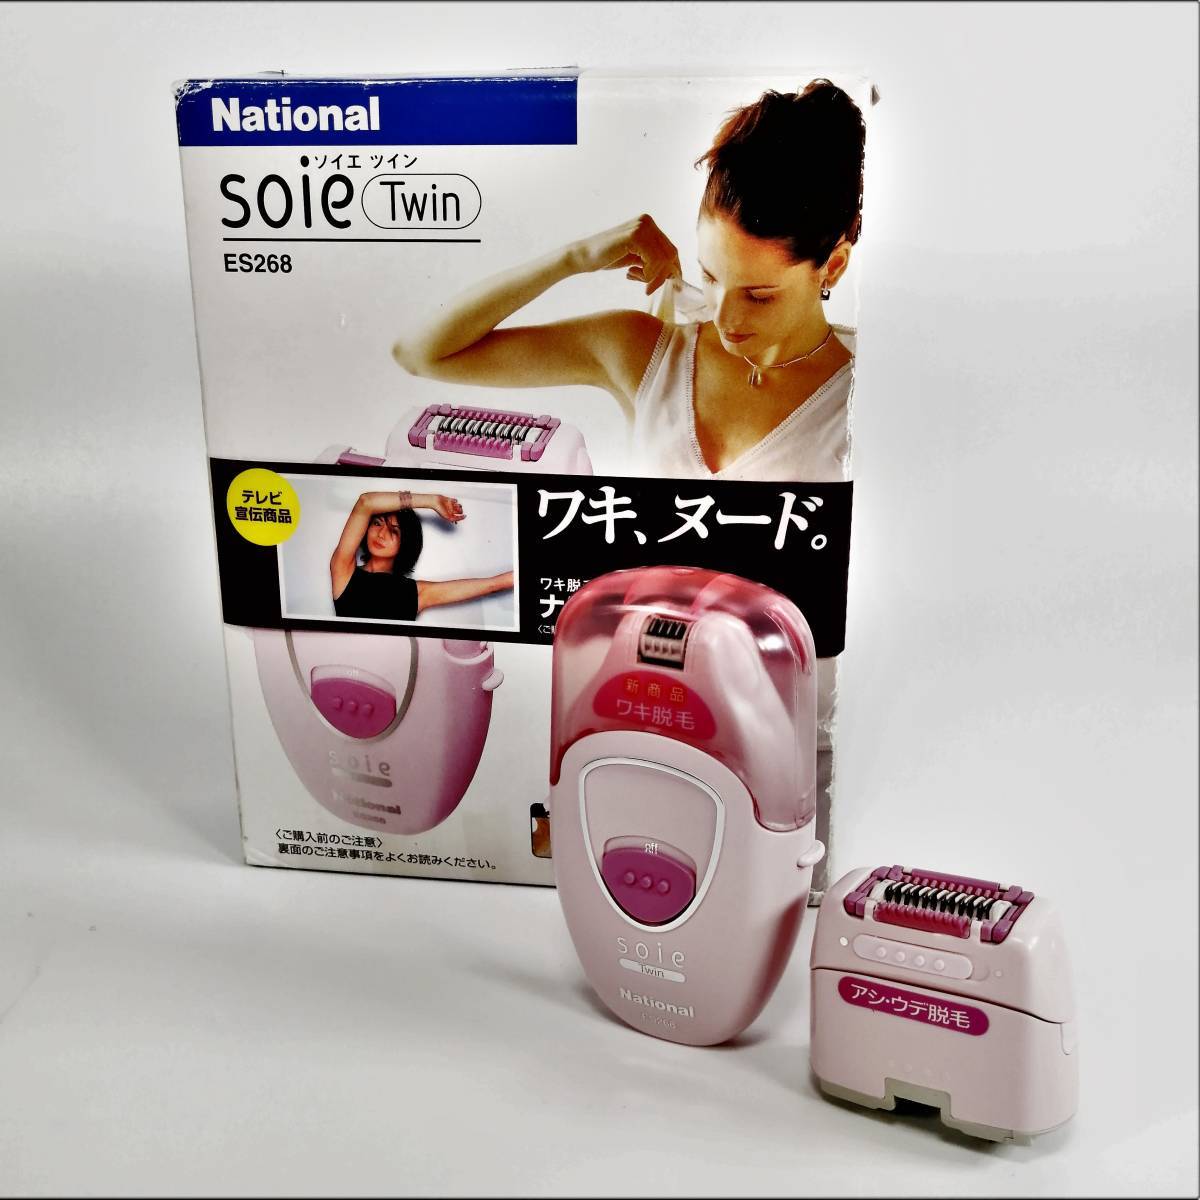  unused Nati0nalsoie twin ES268 pink beauty depilator armpit bikini line double low ring hair removal system made in Japan [ outlet ] 22 00878